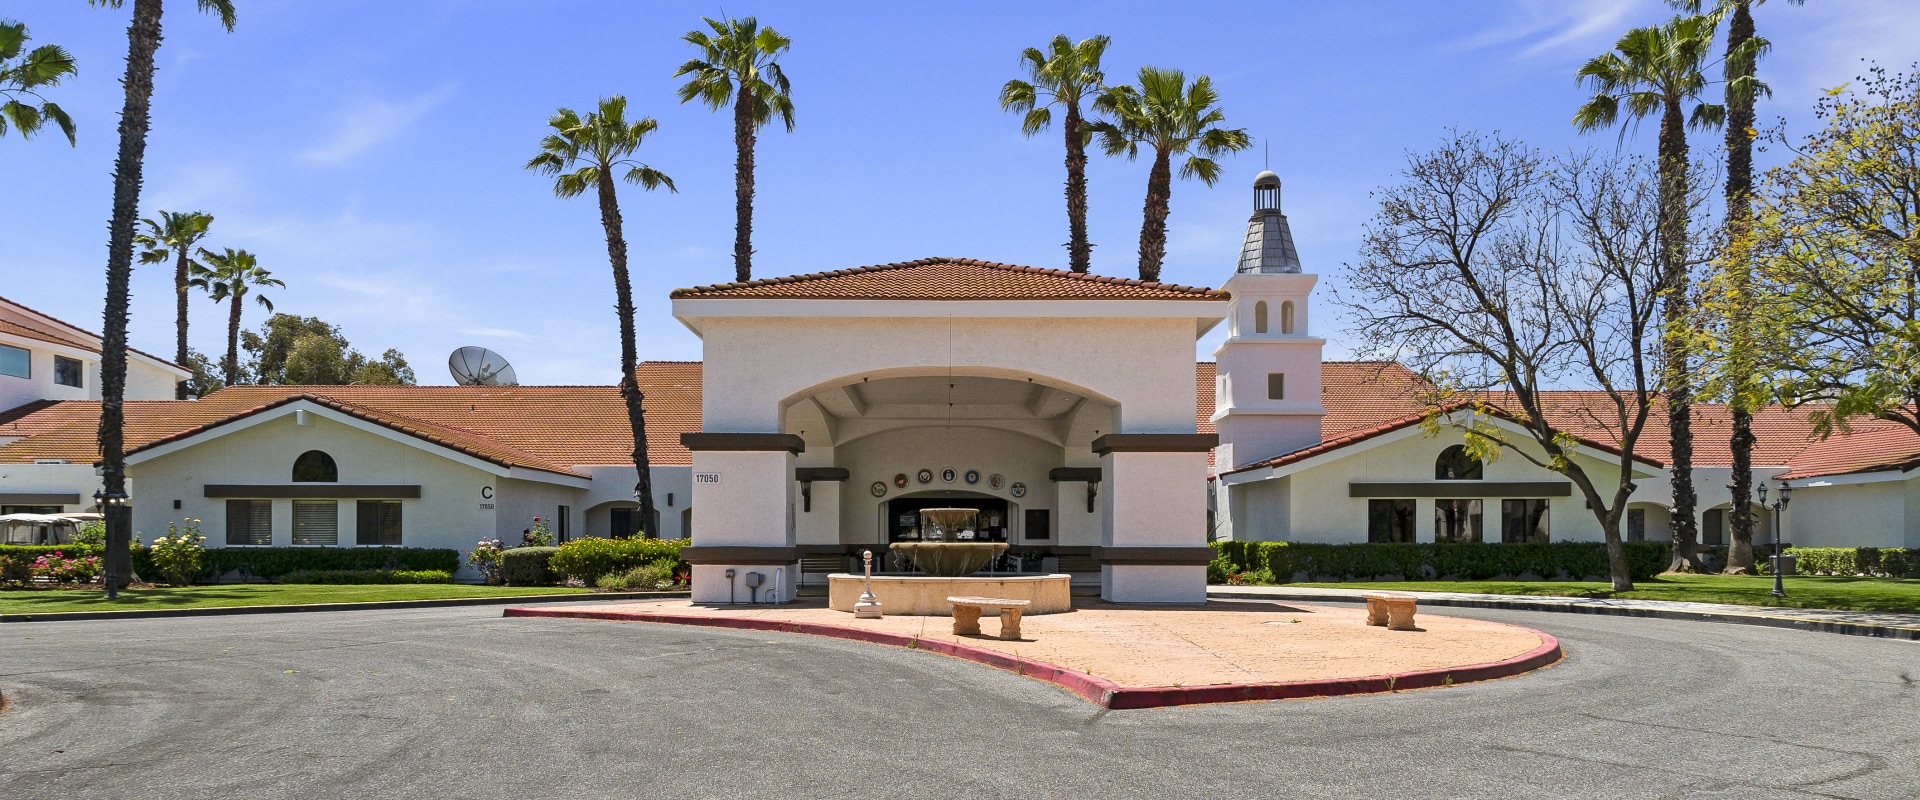 Senior Living Facilities in Riverside County, CA: A Comprehensive Guide